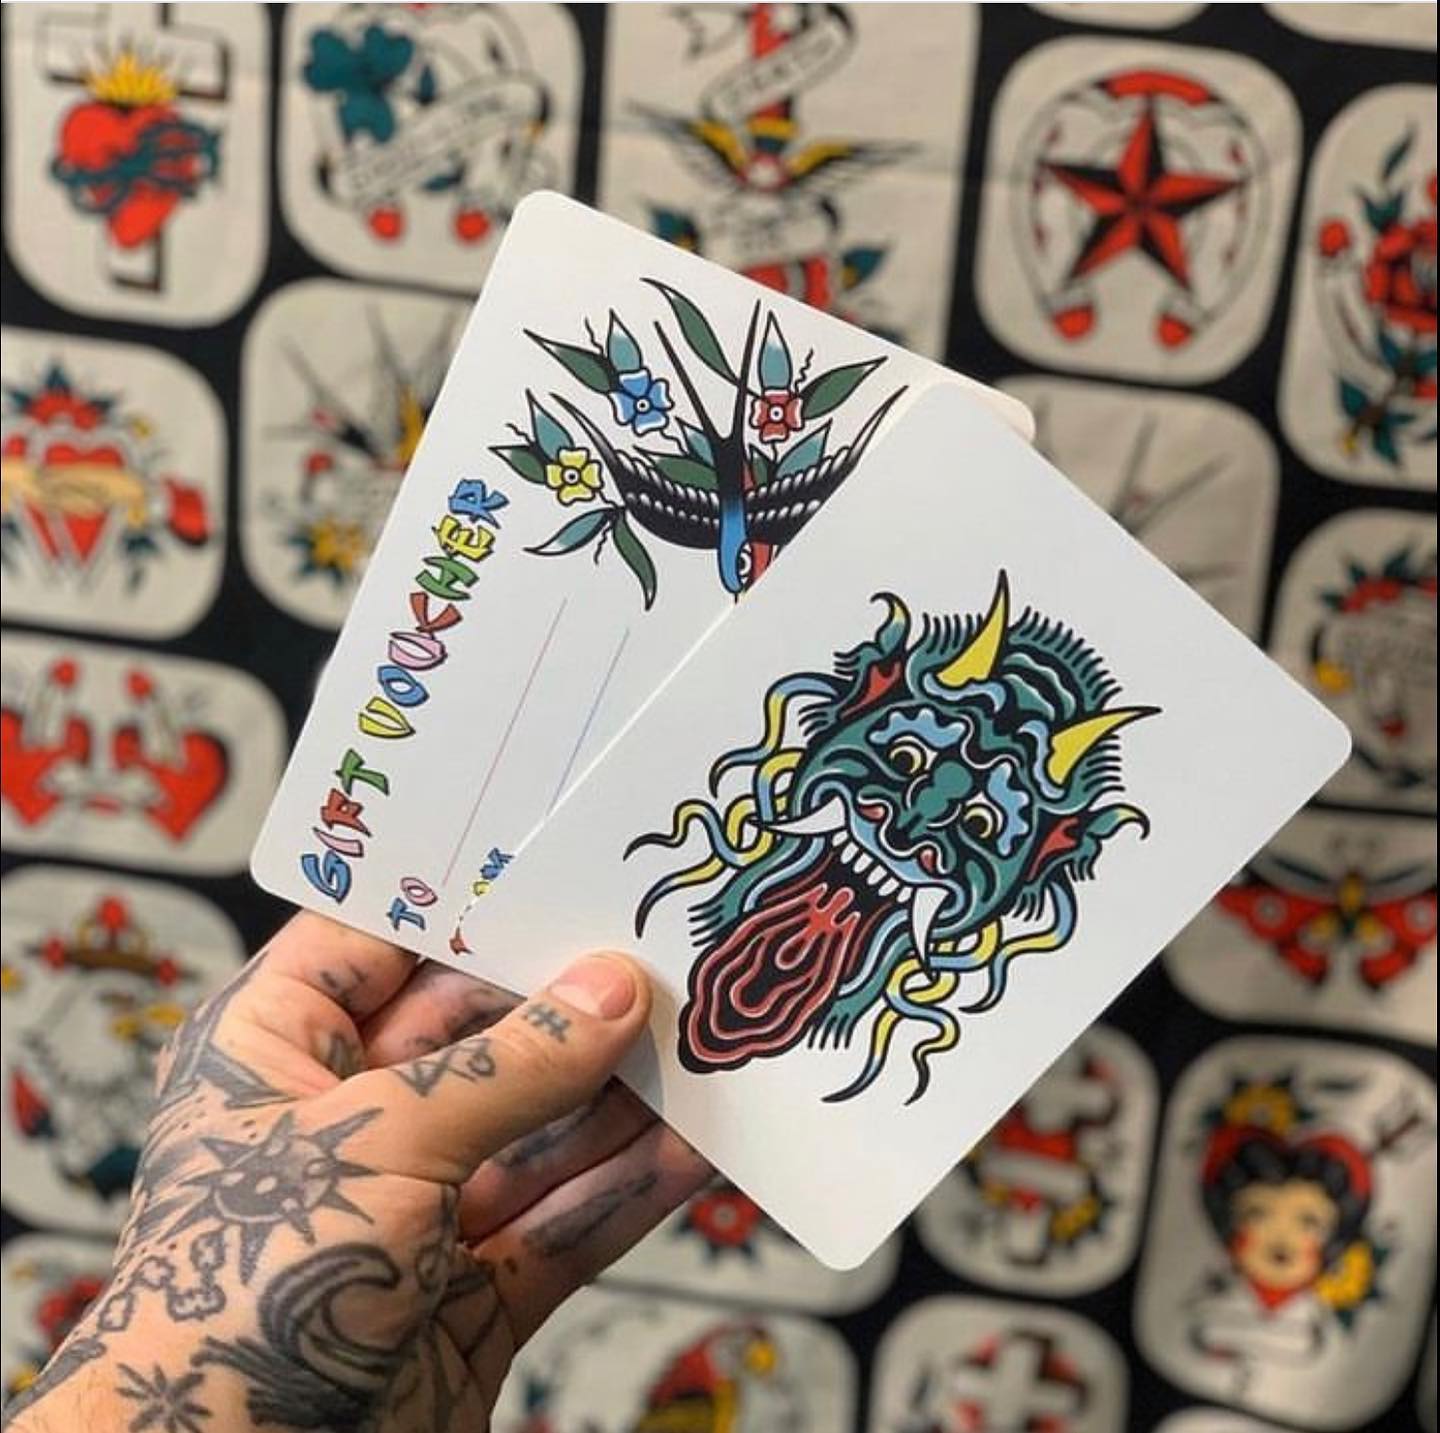 Carni has officially wapped out the gift vouchers! They are only valid for tattoos with him so please keep that in mind if you’re considering purchasing them! ❤️‍🔥

If interested, please contact carnigold directly for details ✨

            